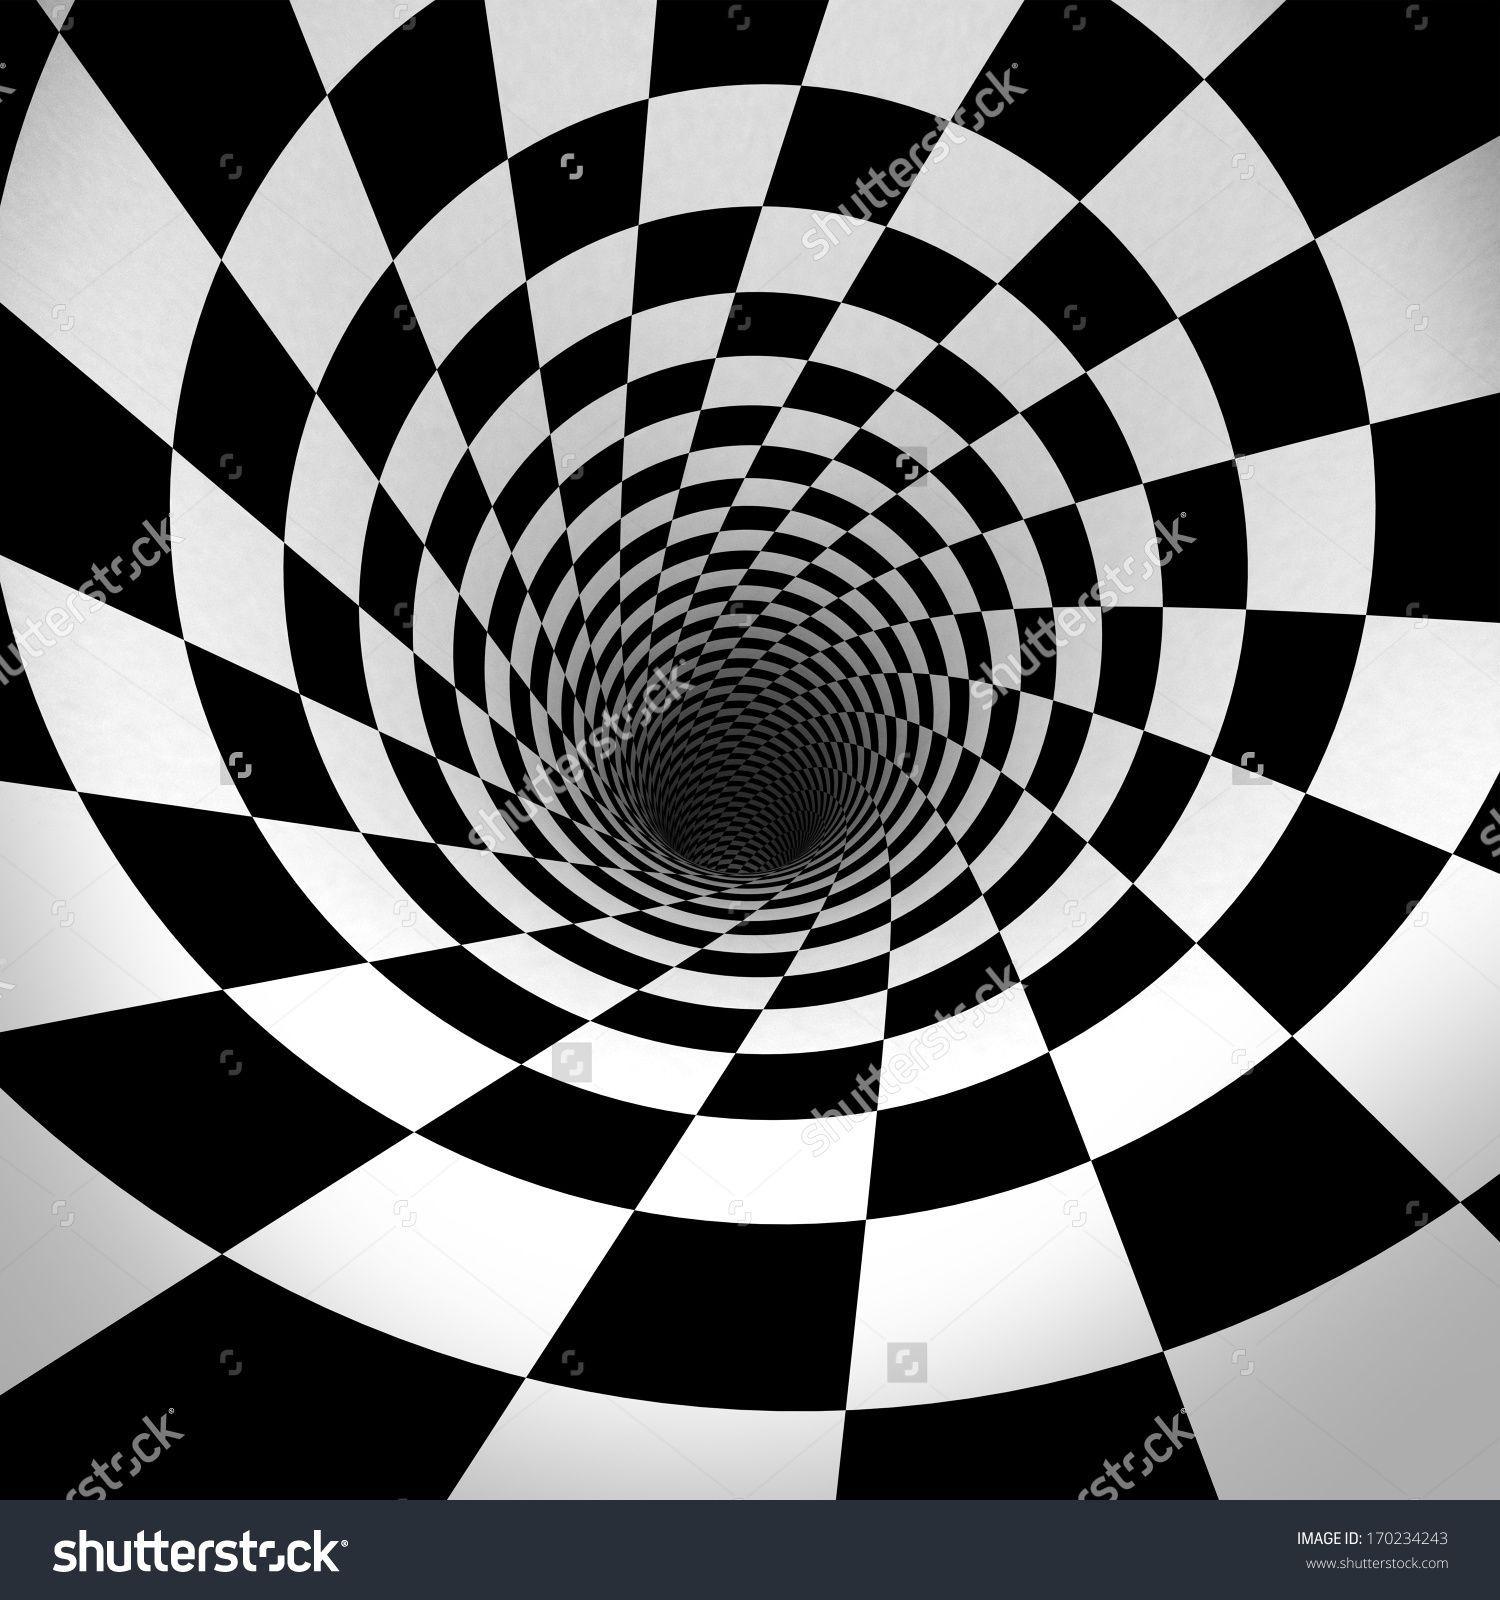 Black and White Spiral Logo - Black And White Spiral. 3d Stock Photo 170234243 : Shutterstock ...